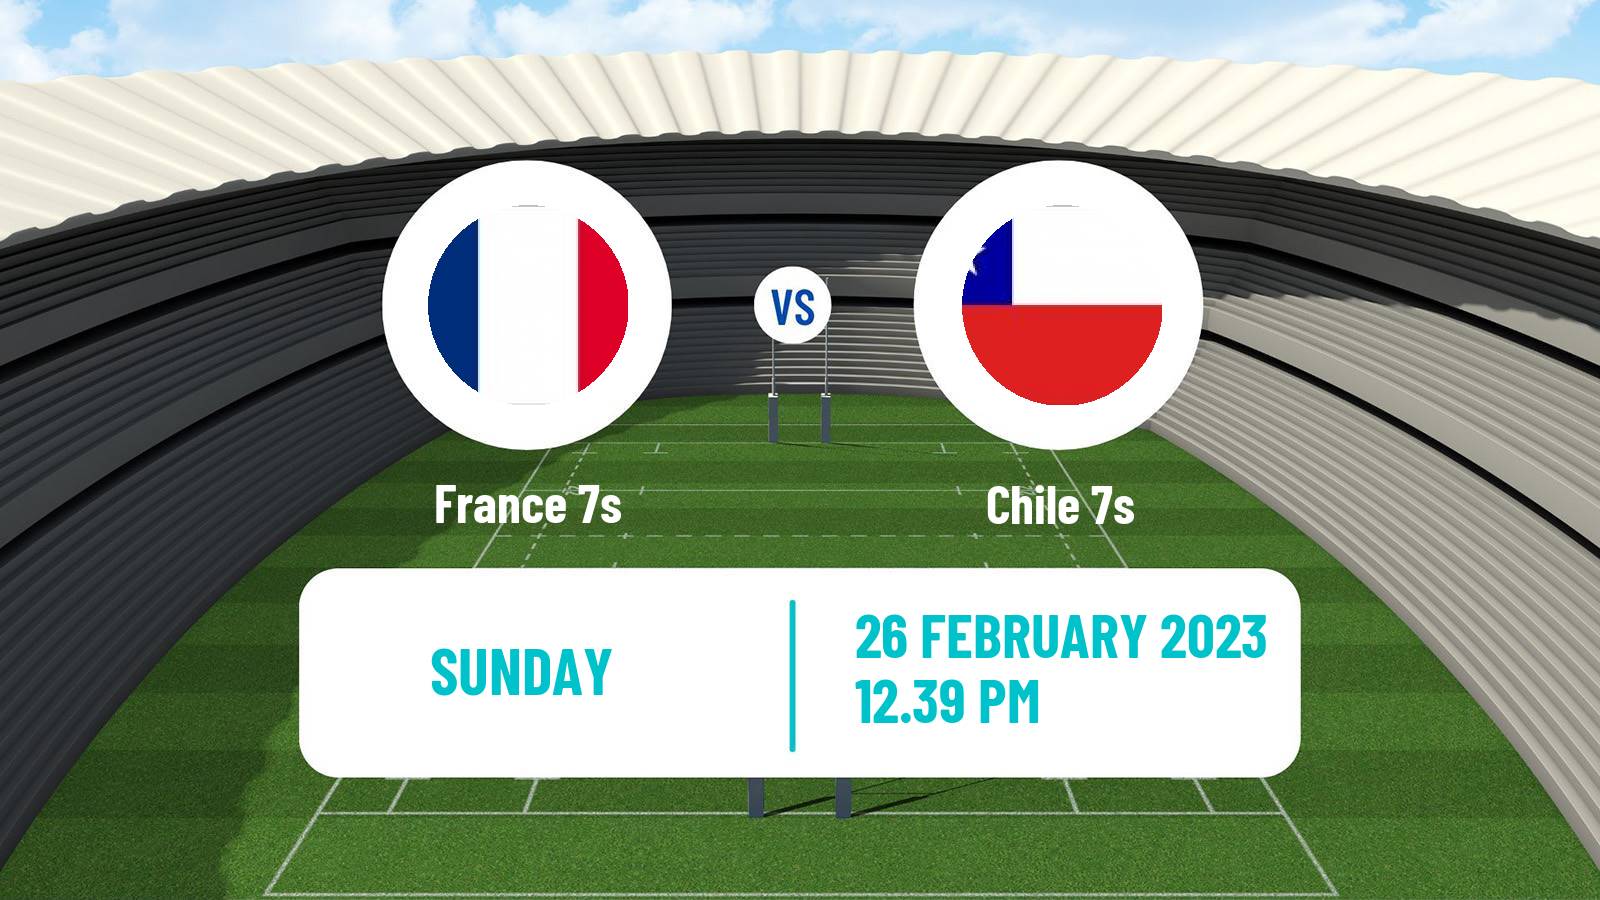 Rugby union Sevens World Series - USA France 7s - Chile 7s